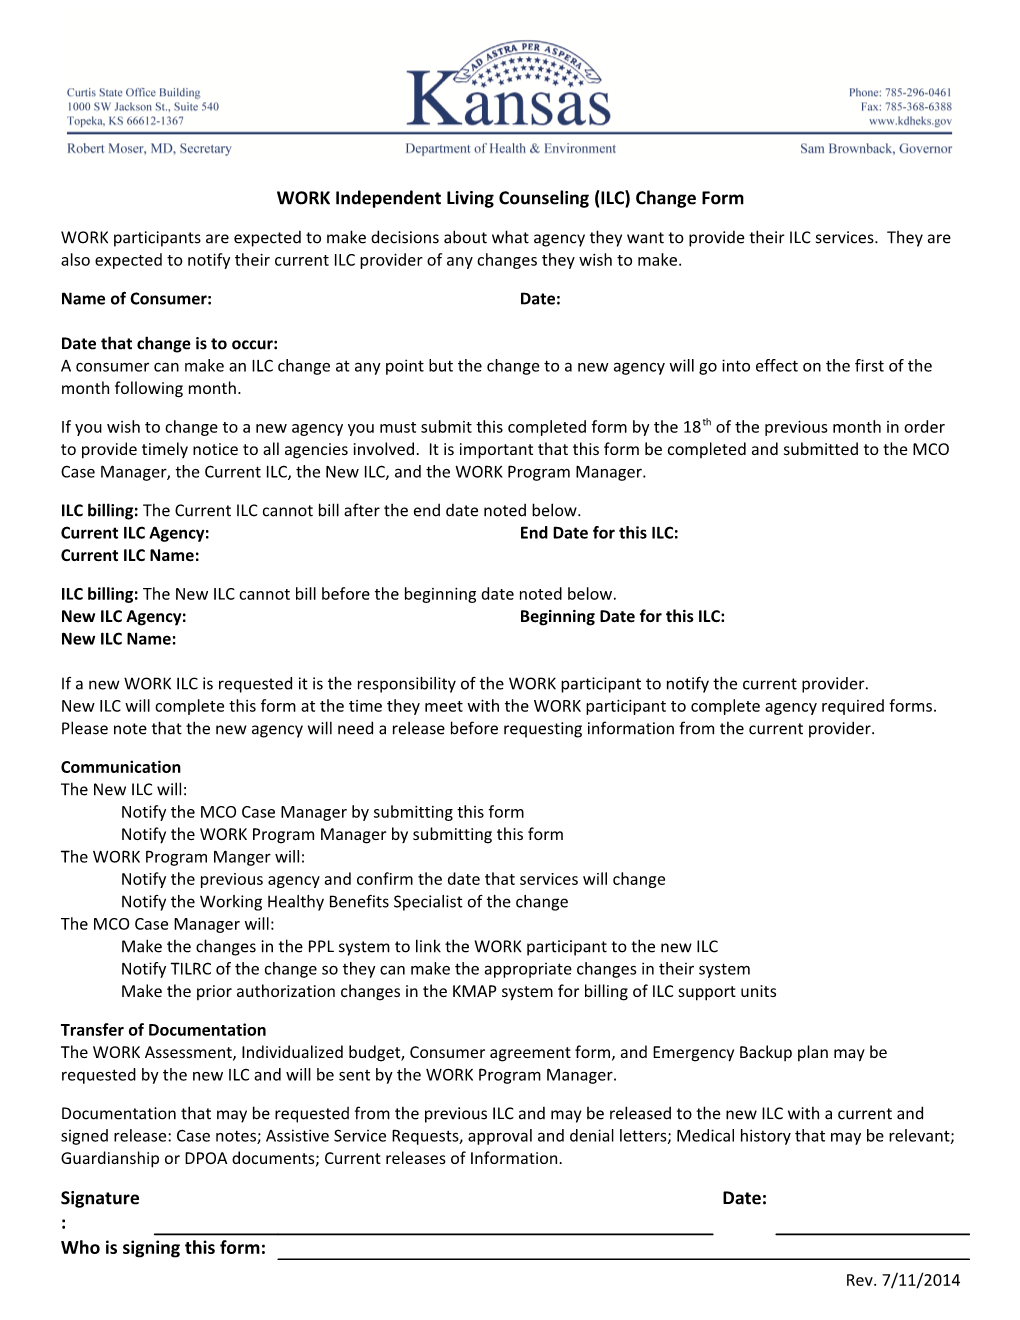 WORK Independent Living Counseling (ILC) Change Form